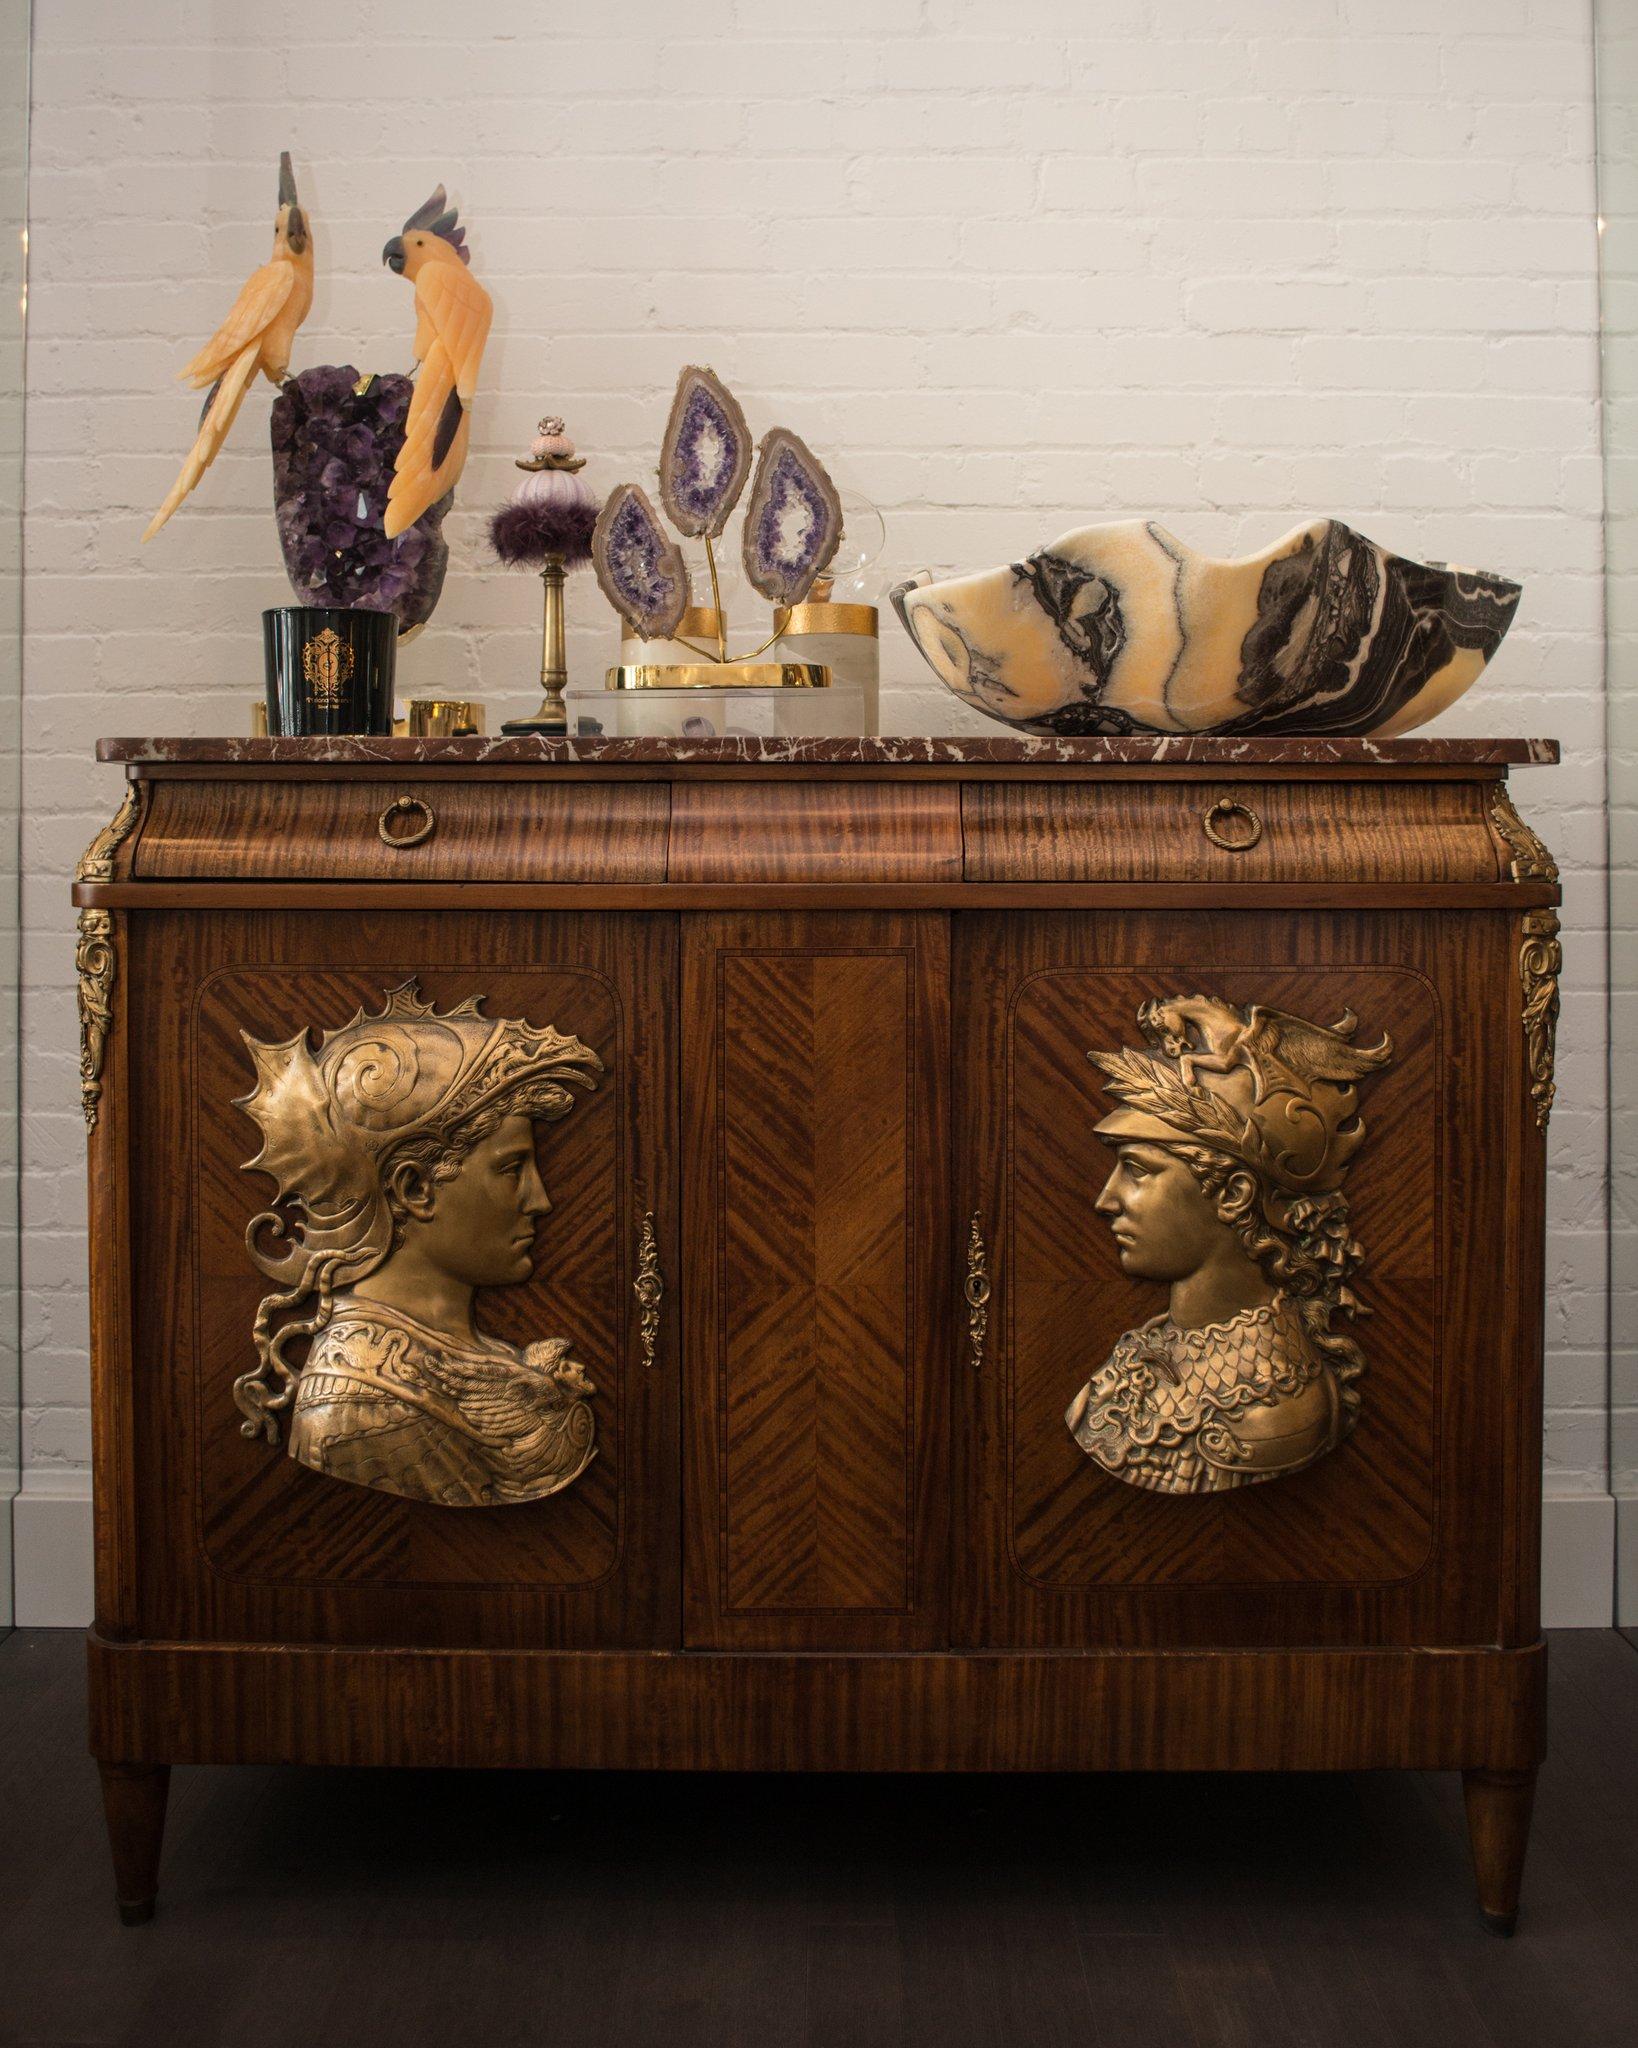 Our most coveted antiques are from the Napoleon III era. This spectacular French antique commode is the statement piece you’ve been looking for. What makes this commode so unique are the large Bronze reliefs on each door and the original Breccia